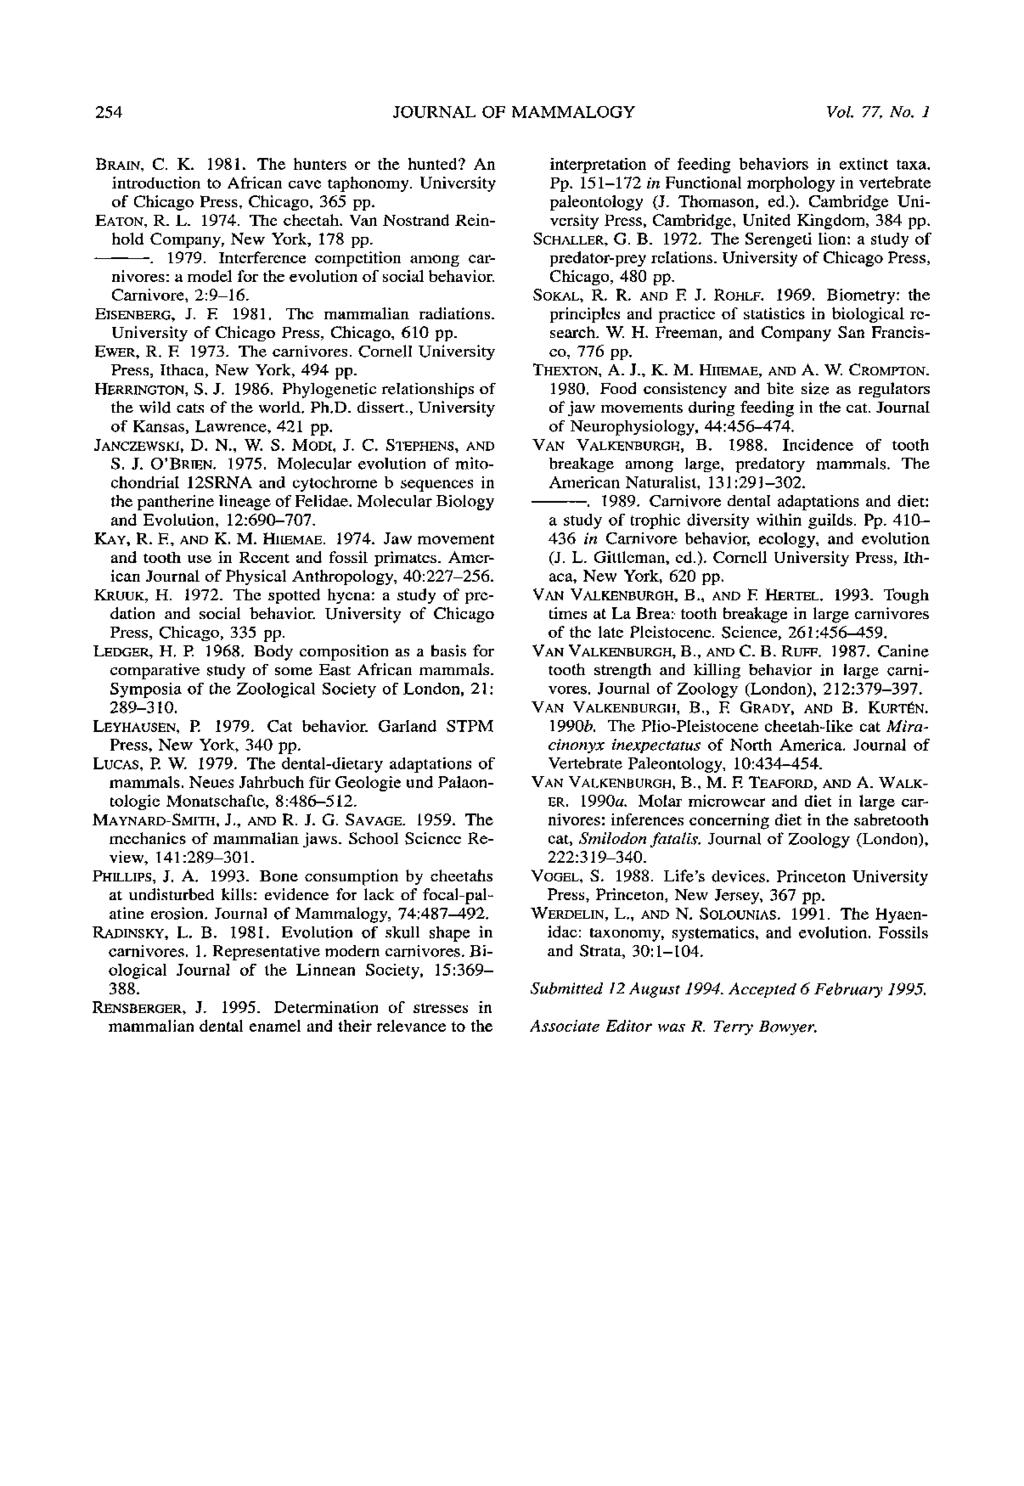 254 JOURNAL OF MAMMALOGY Vol. 77, No. 1 BRAIN, C. K. 1981. The hunters or the hunted? An introduction to African cave taphonomy. University of Chicago Press, Chicago, 365 pp. EATON, R. L. 1974.